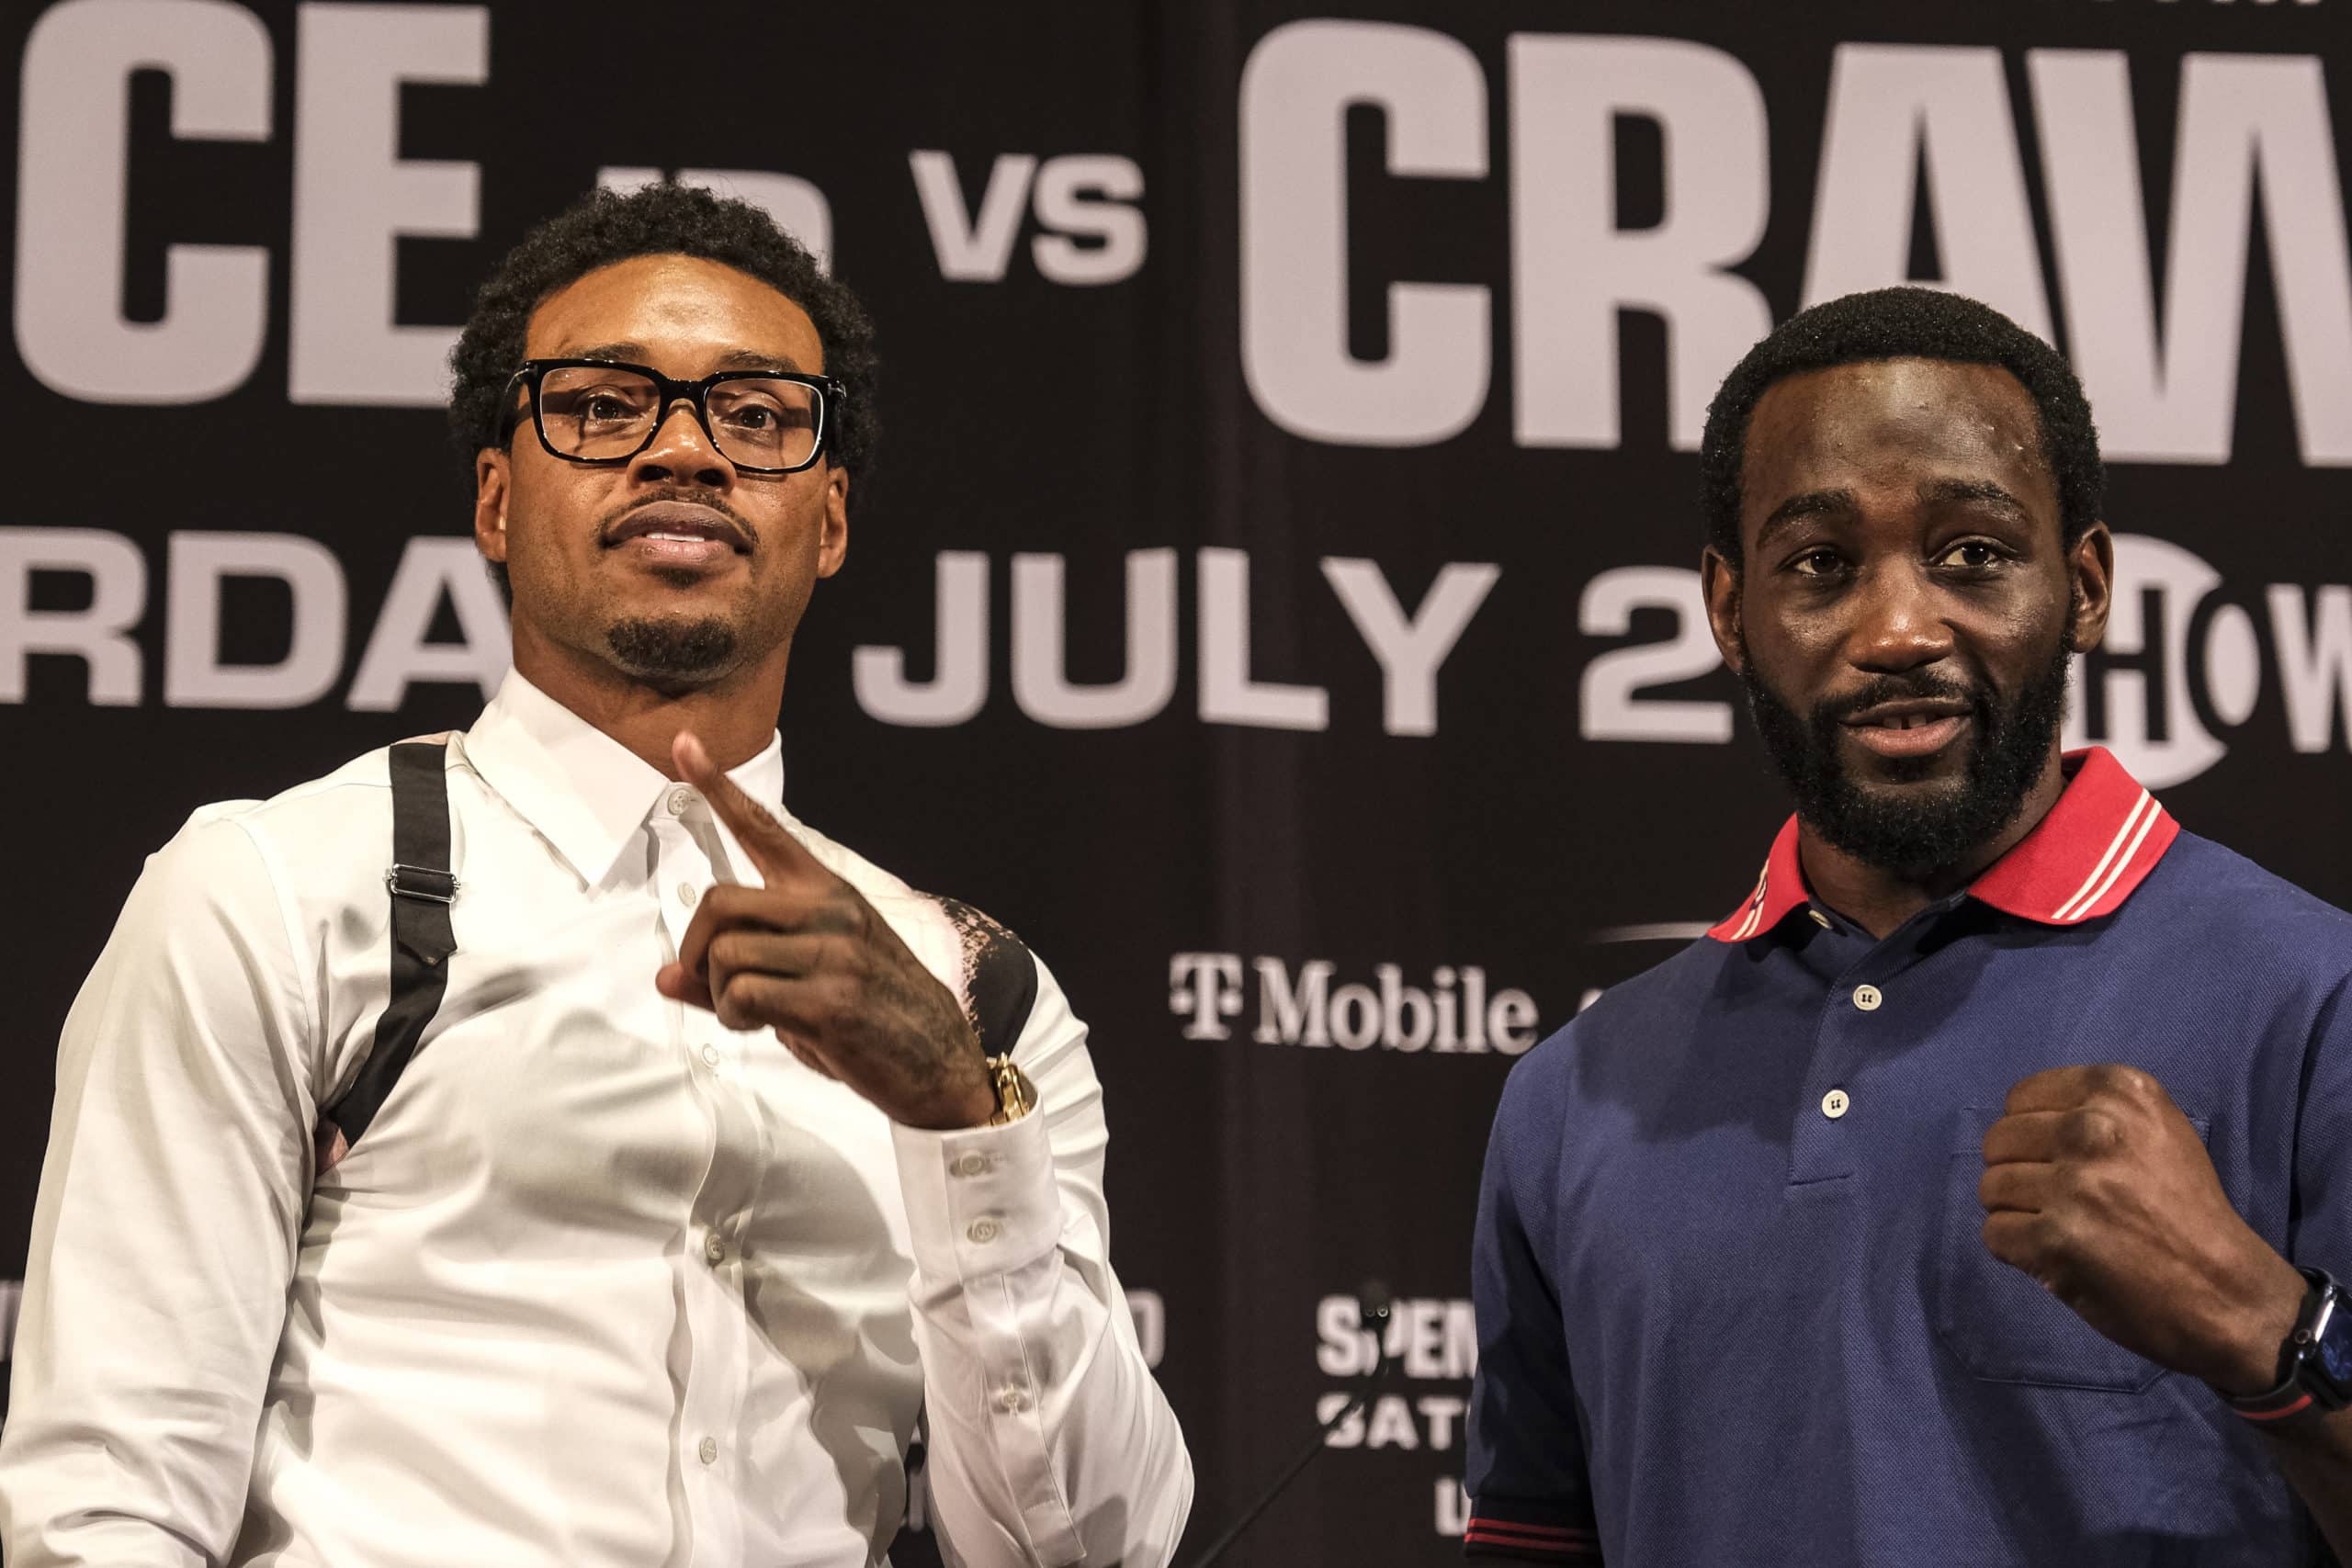 ERROL SPENCE Jr. and WBO welterweight champion TERENCE CRAWFORD face off for the first time ahead of their fight for the undisputed welterweight championship of the world July 29th on Showtime PPV